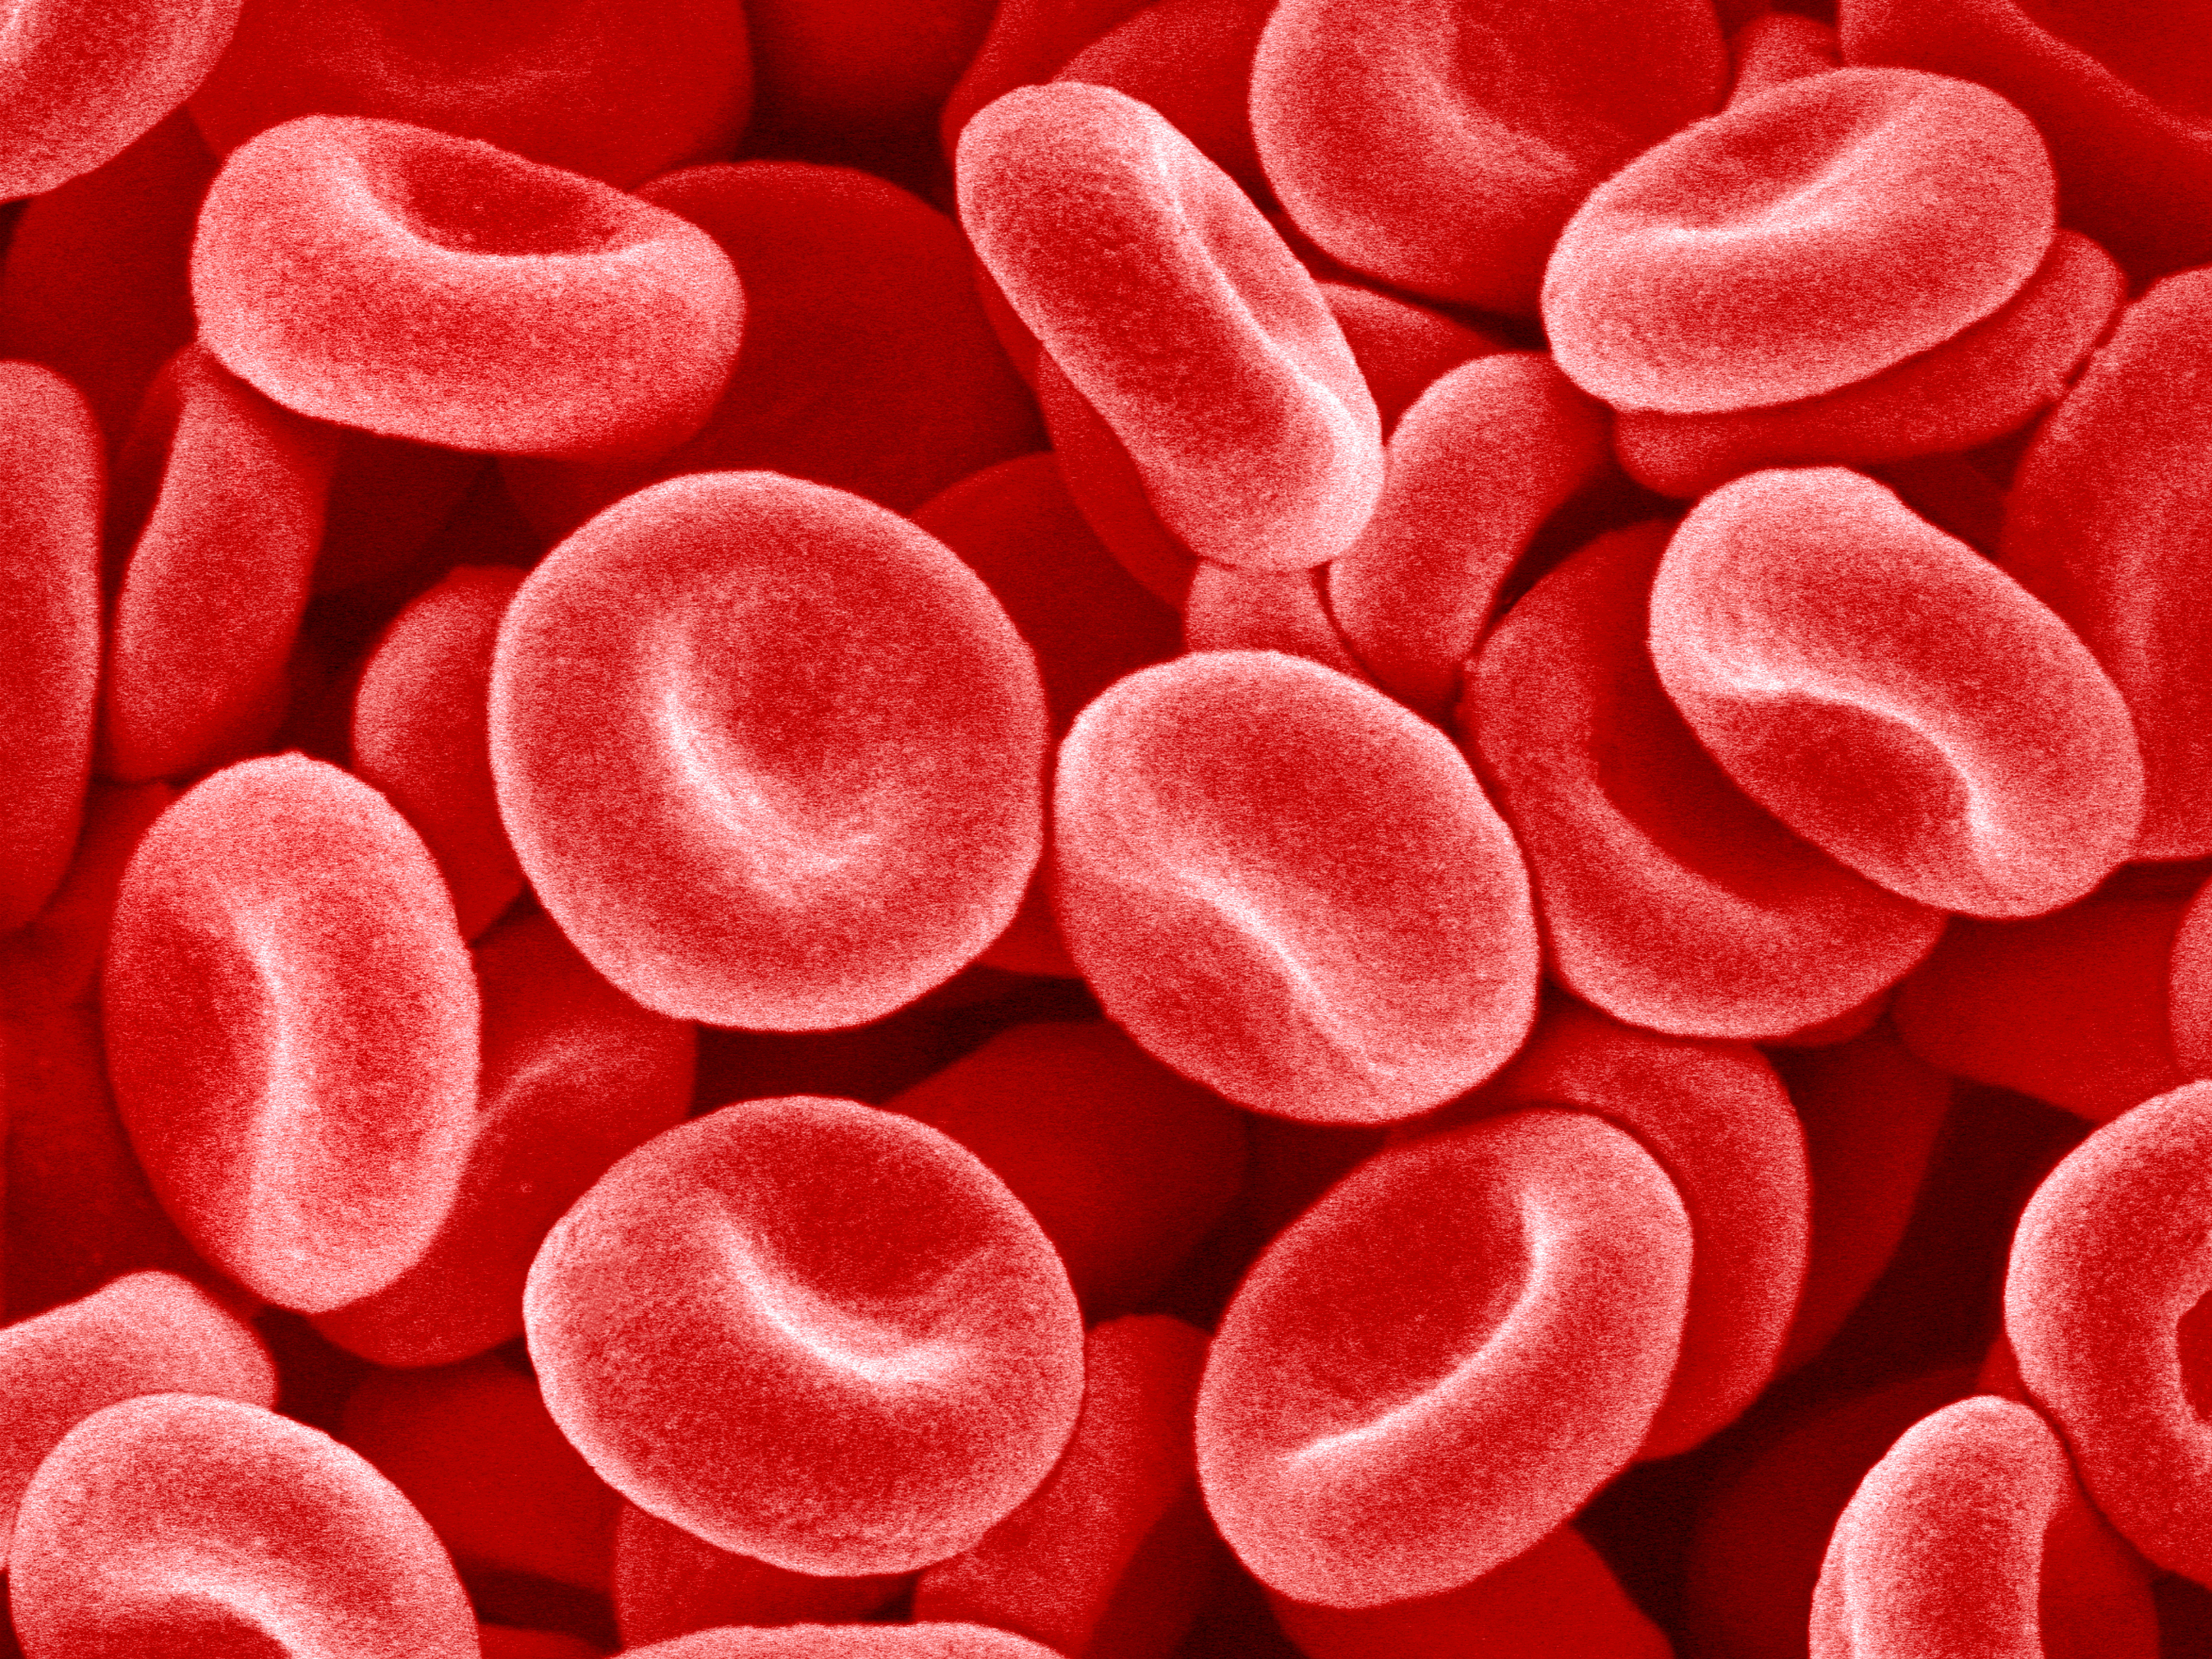 red blood cells